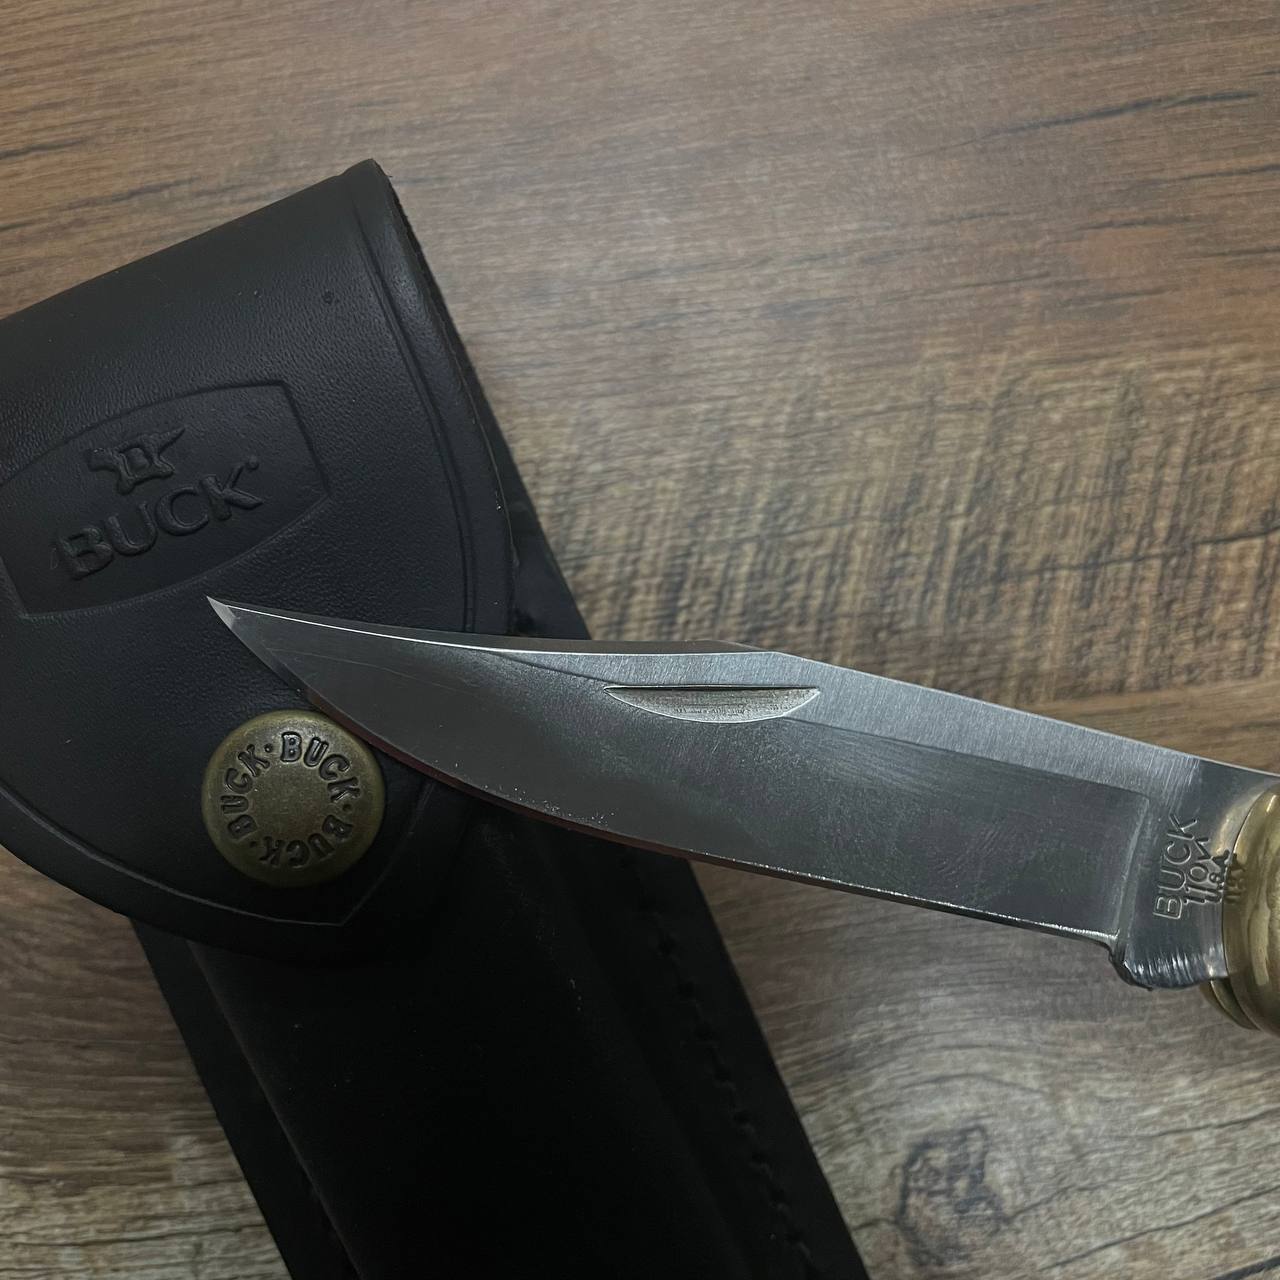 Thumbnail for article "How to fix a broken knife tip". Picture of a knife resting on a sheath